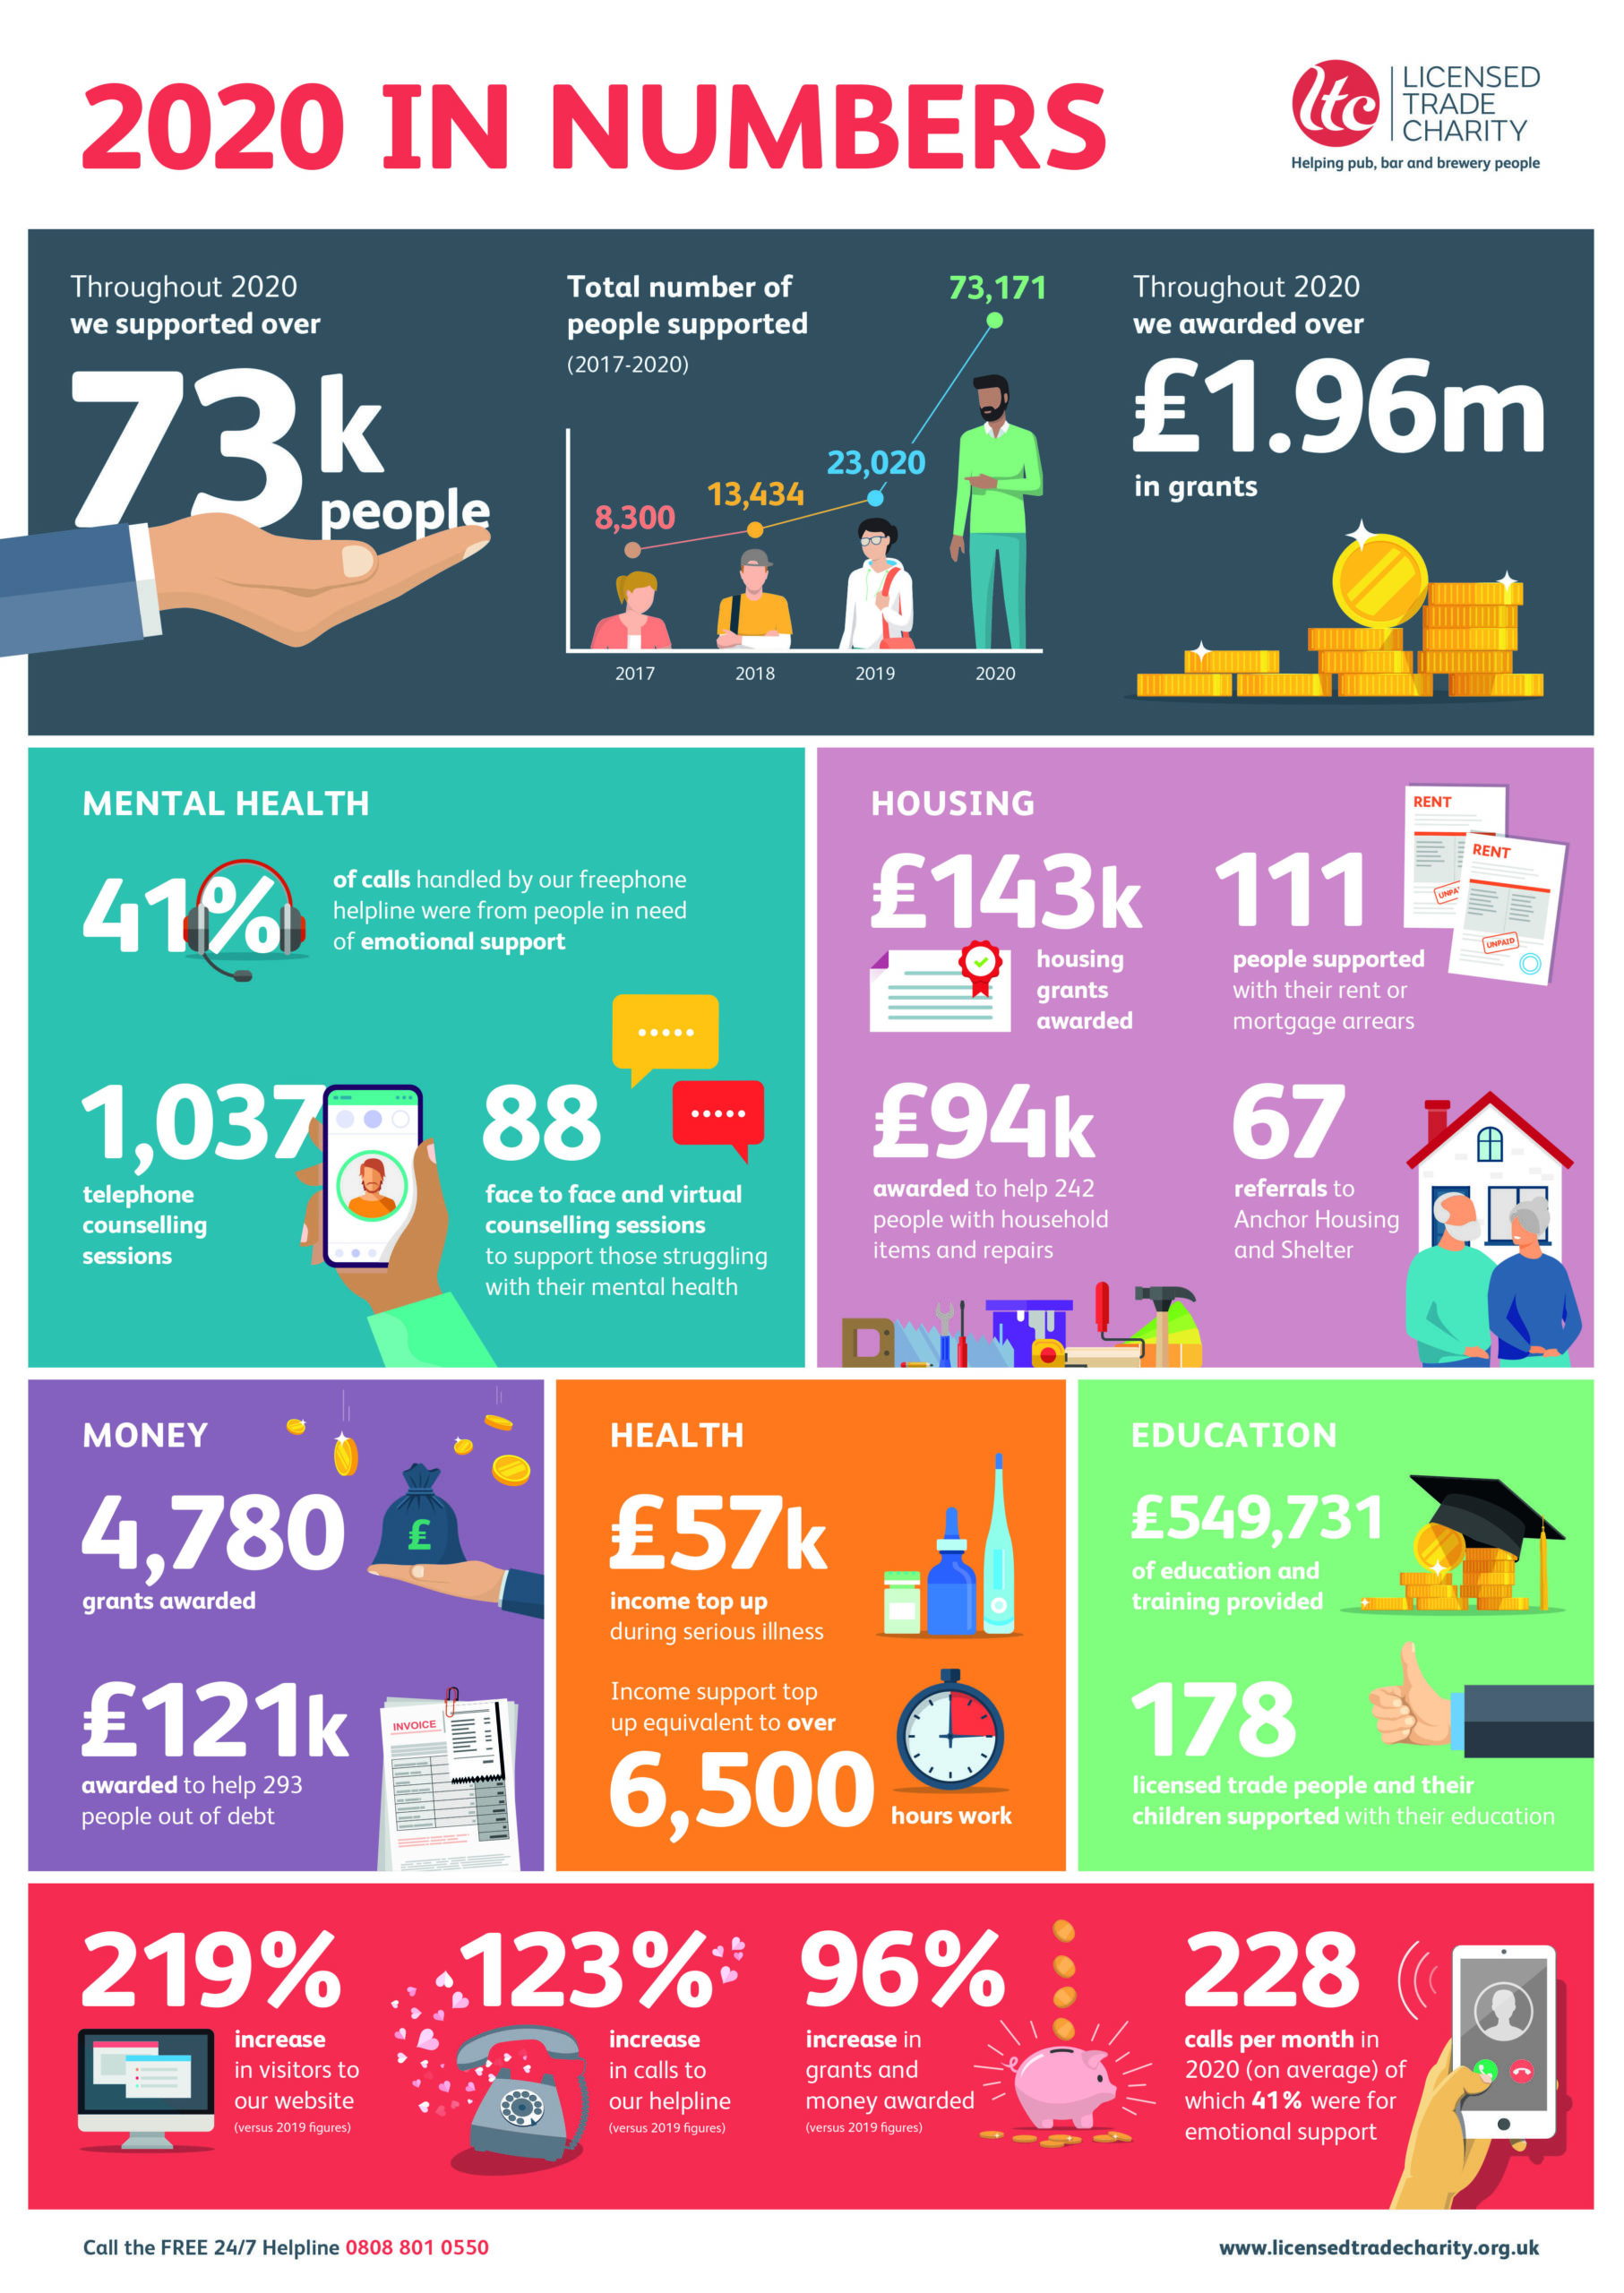 Infographic with 2020 numbers for the Licensed Trade Charity